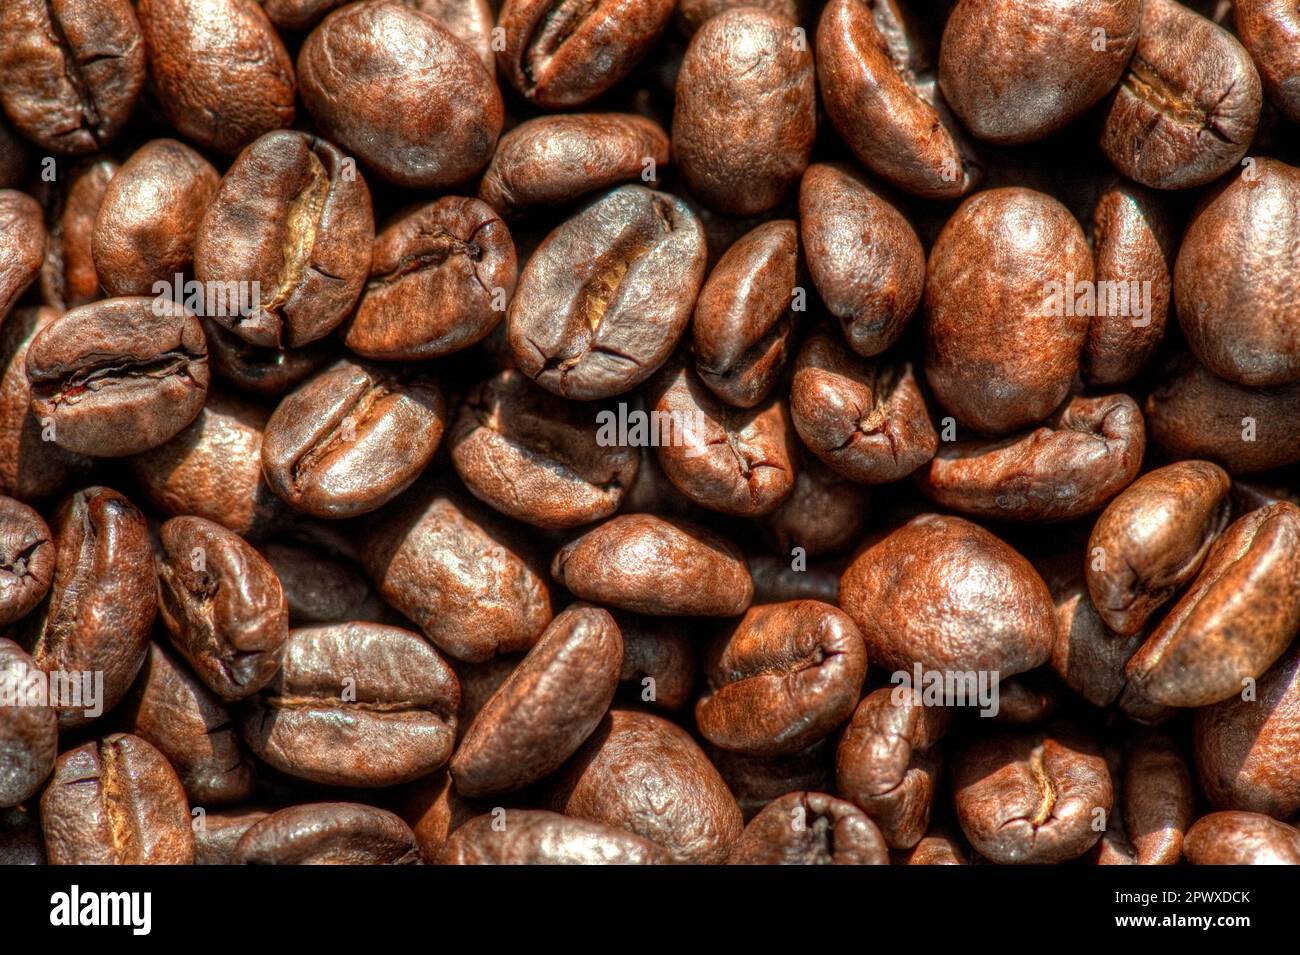 Extreme close up of roasted coffee beans Stock Photo